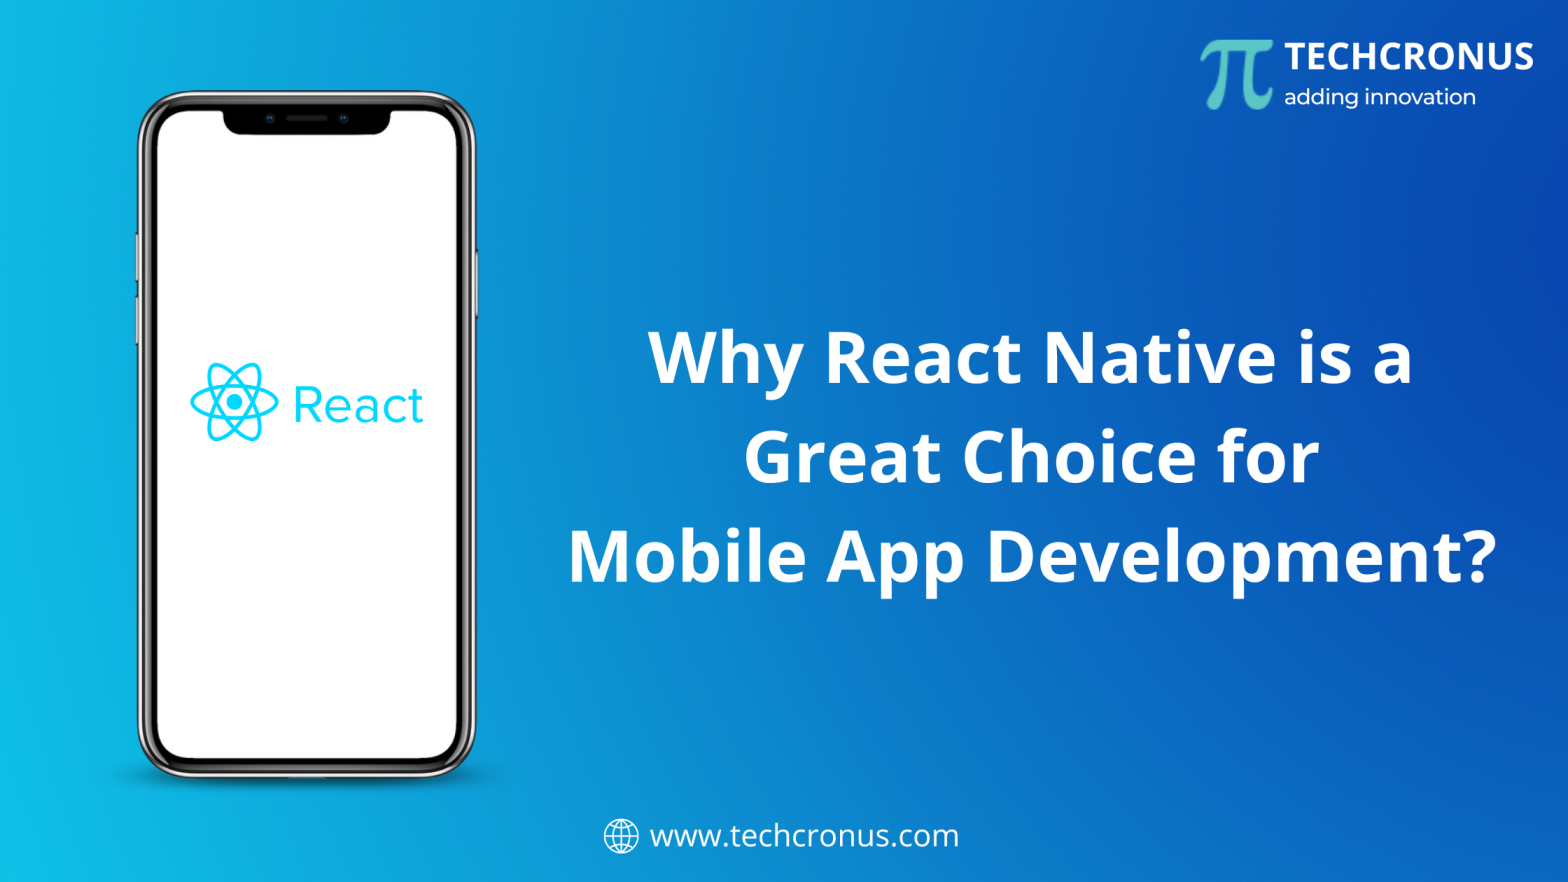 Why React Native is a Great Choice for Mobile App Development